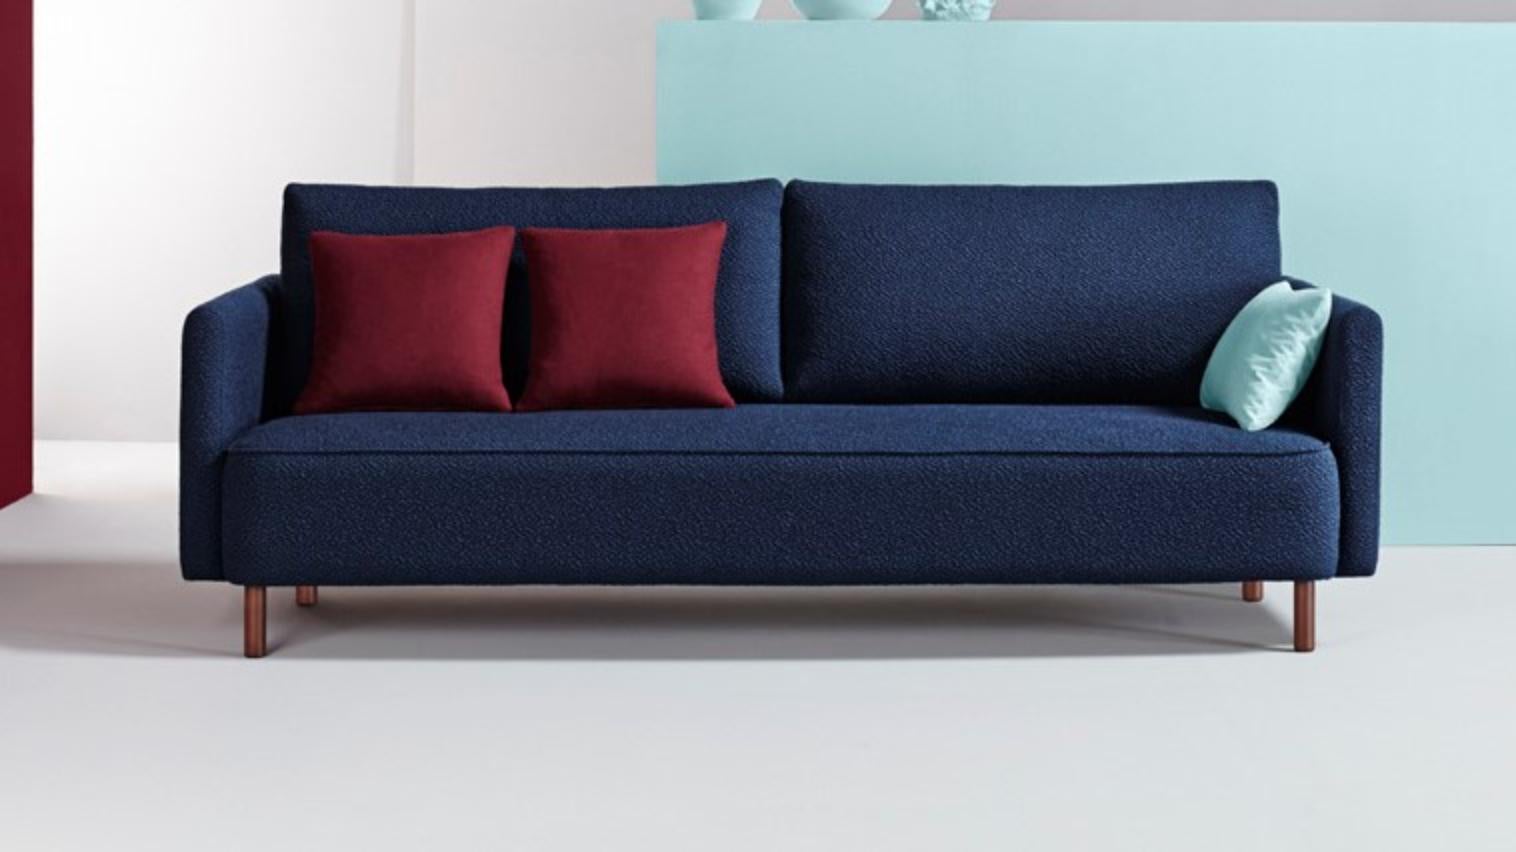 Zero Sofa by Pepe Albargues
Dimensions: Width 200 - Depth 95 - Height 88 - Seat 42 cm
Materials: Pine wood structure reinforced with plywood and tablex.
Foam CMHR (high resilience and flame retardant) for all our cushion filling